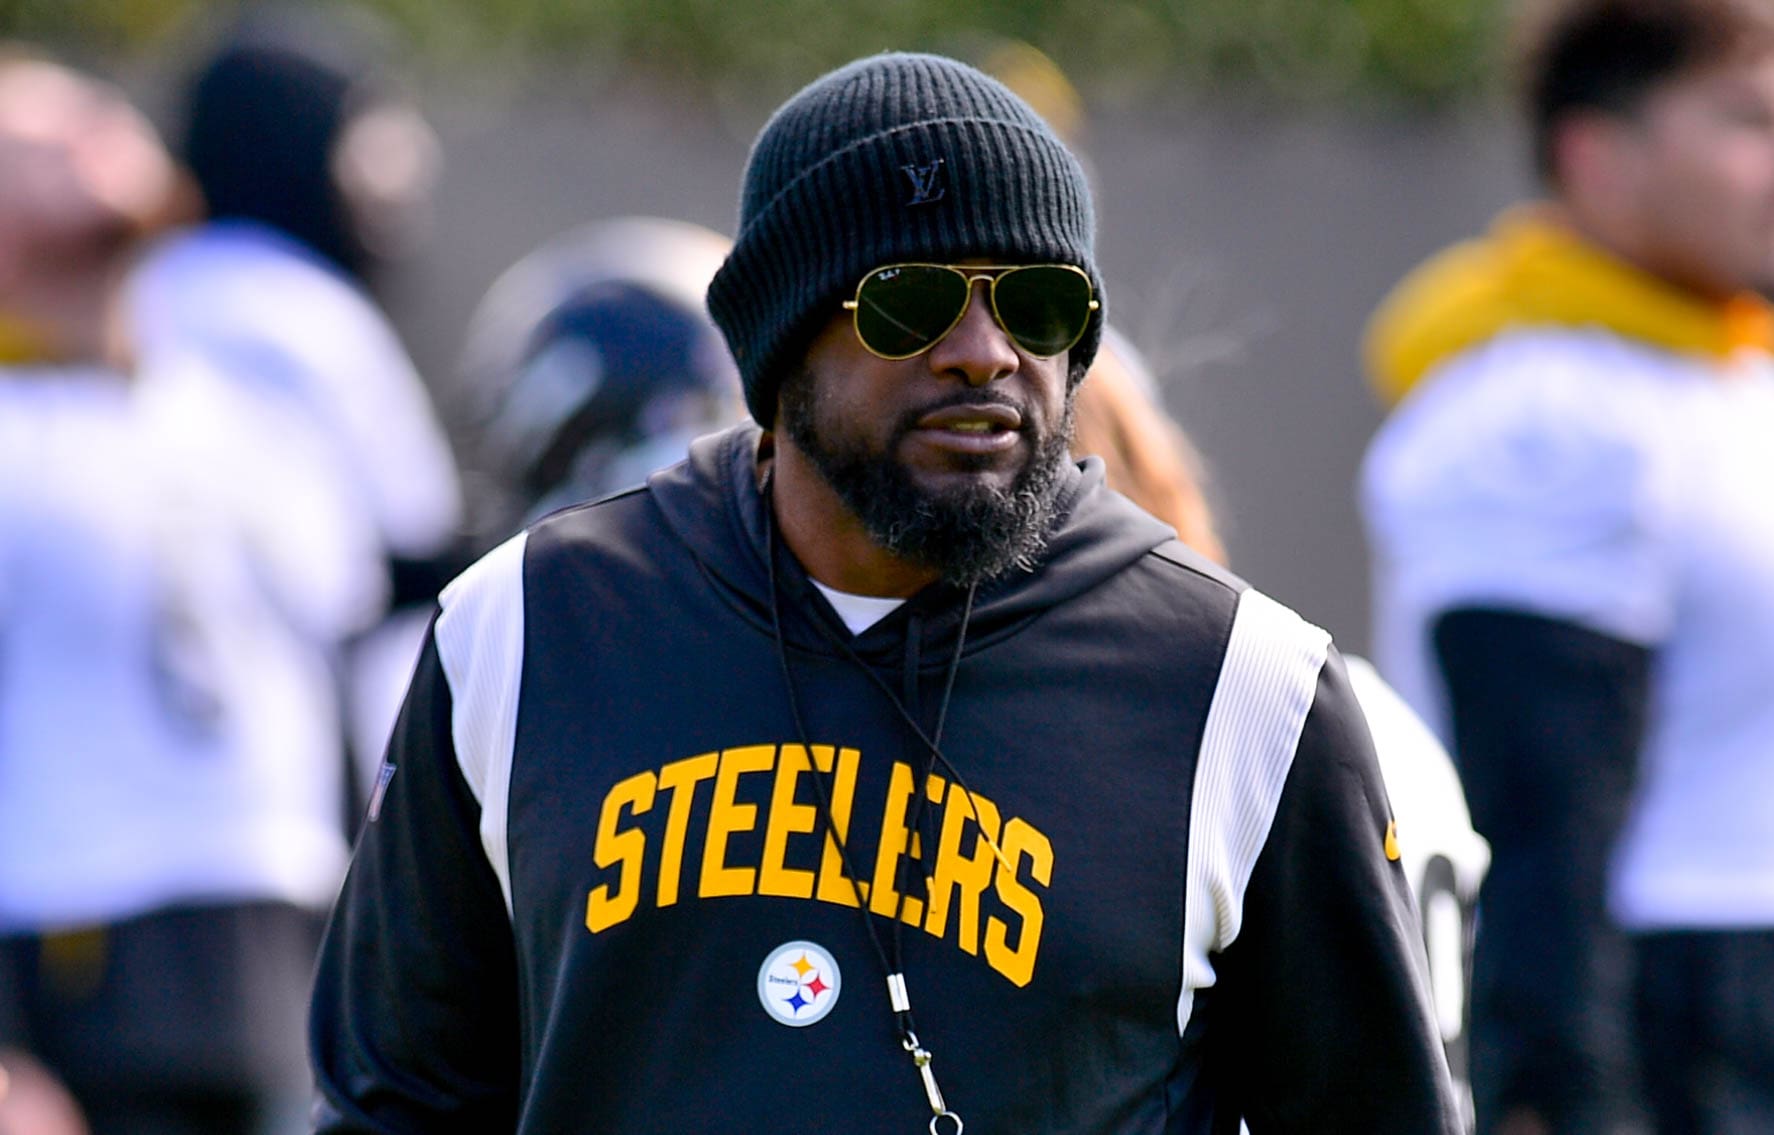 Steelers playoff HC Mike Tomlin